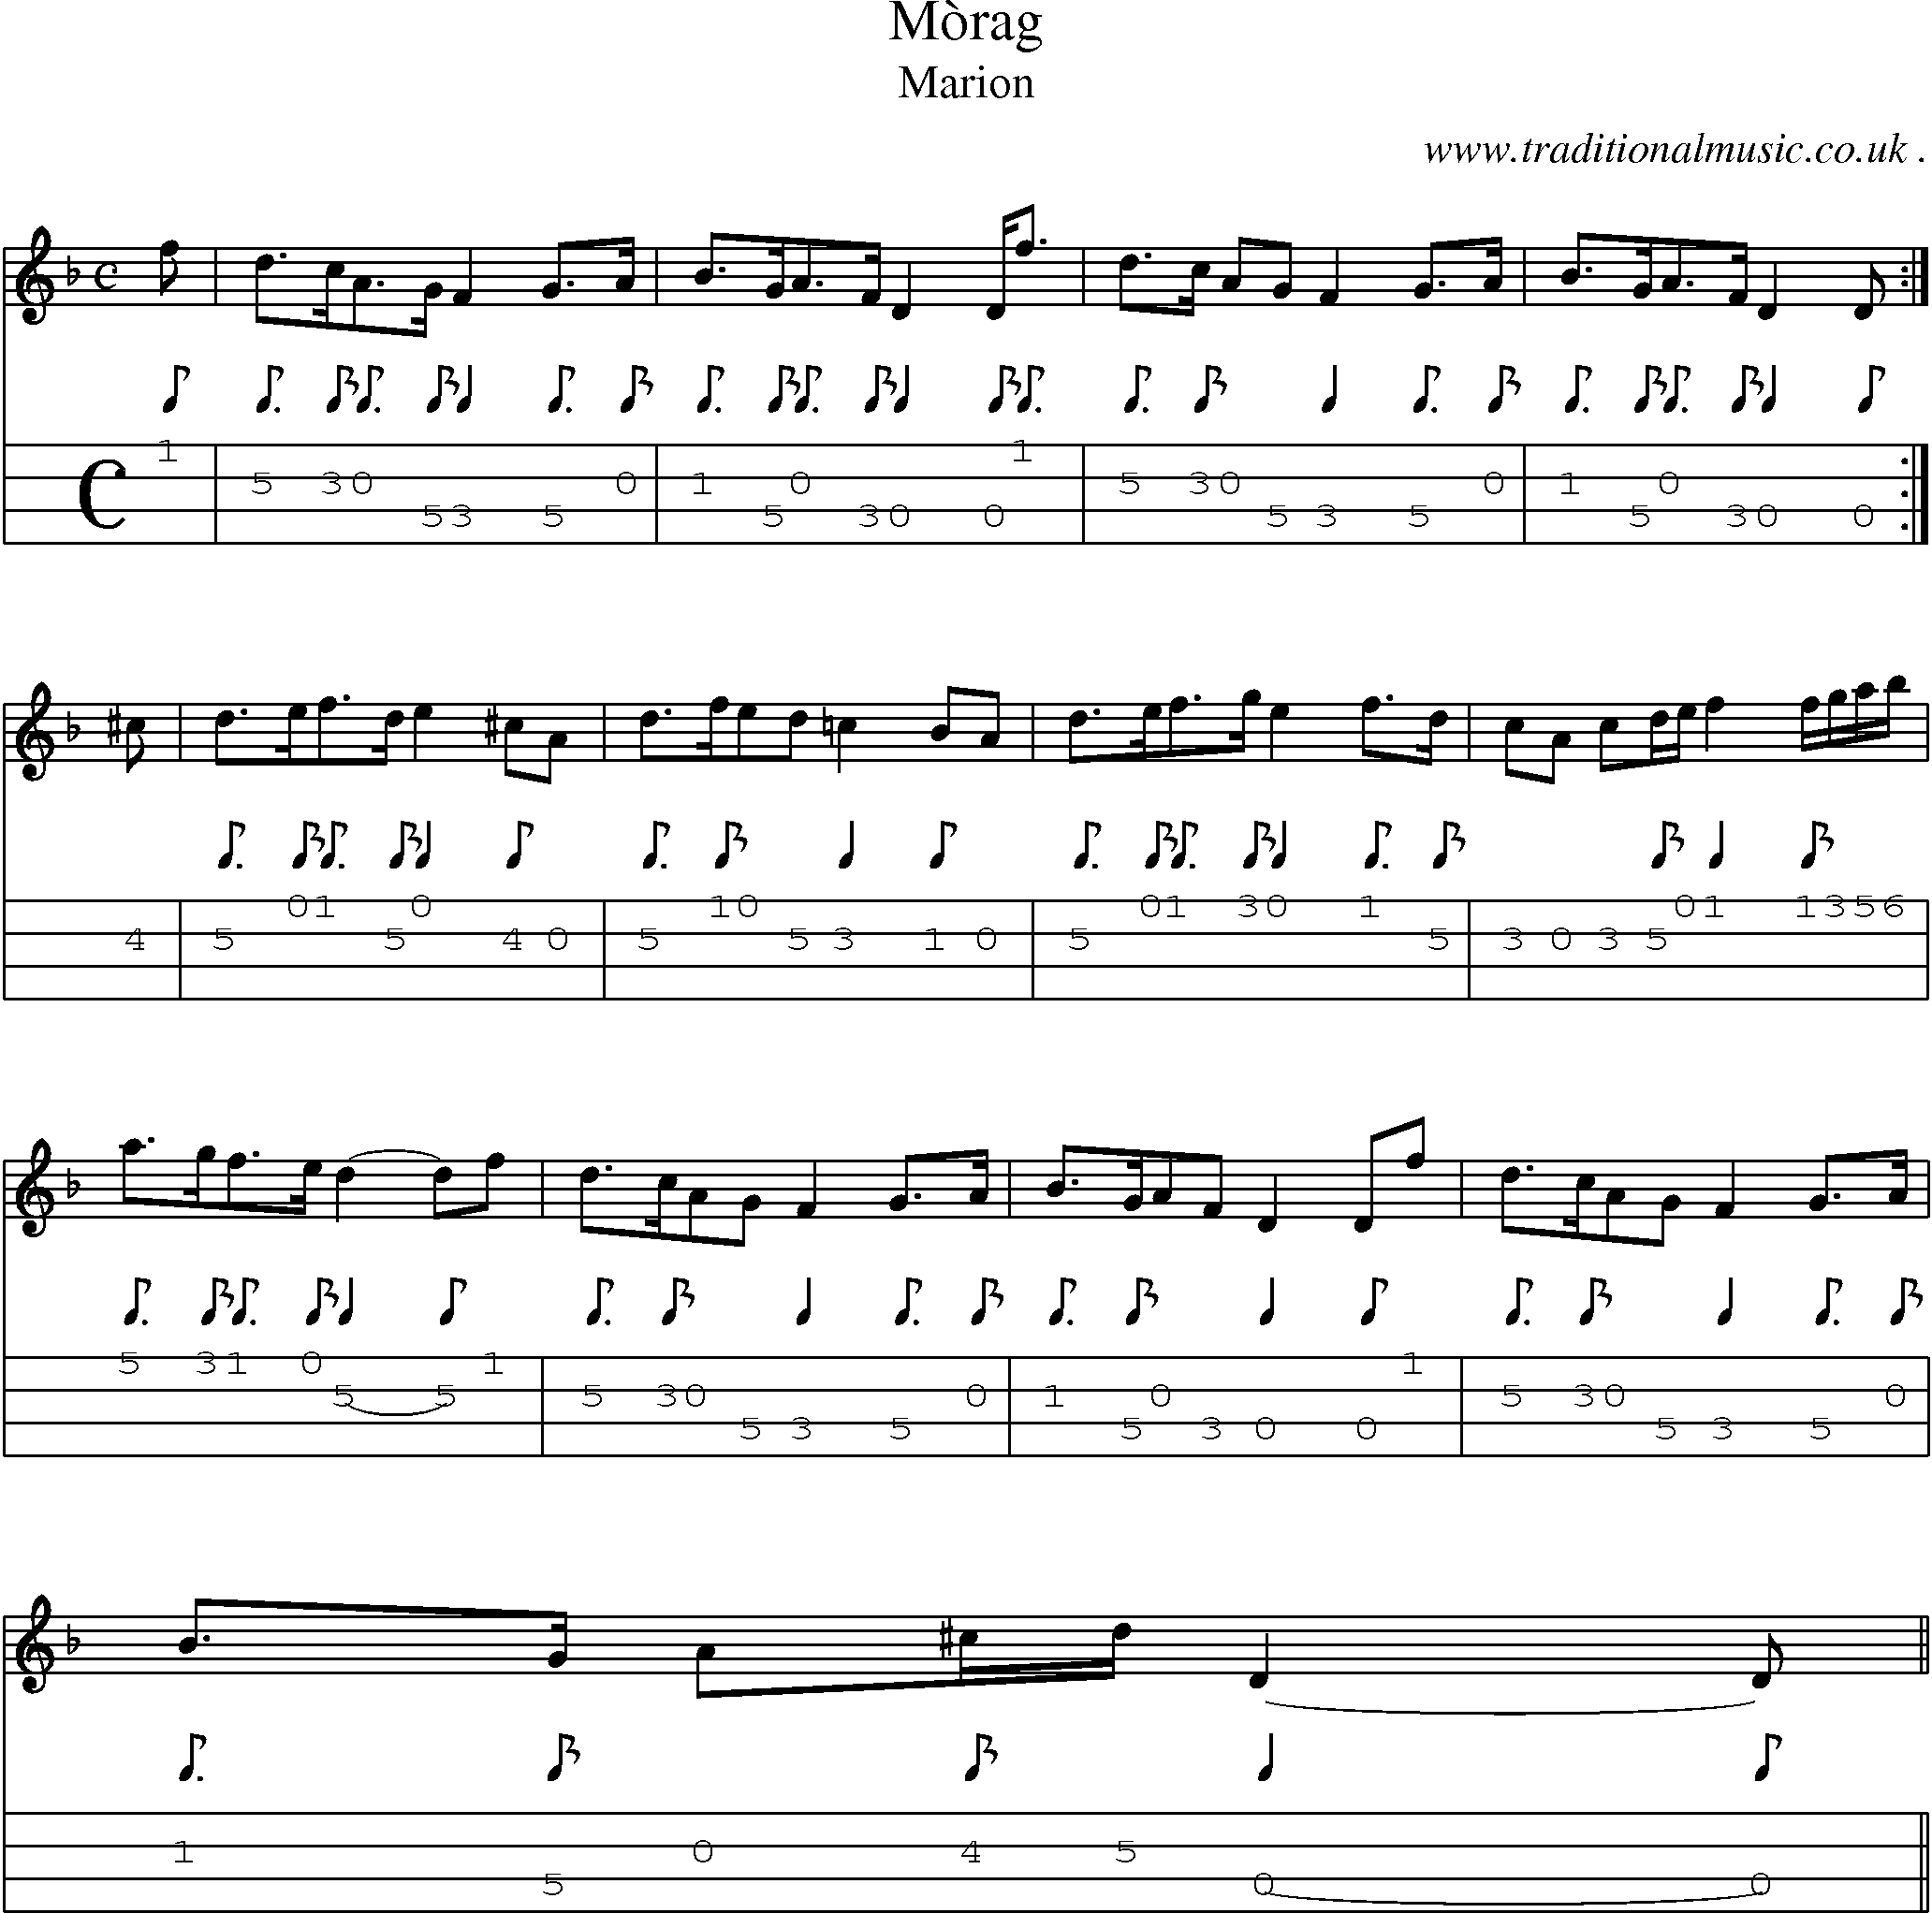 Sheet-music  score, Chords and Mandolin Tabs for Morag